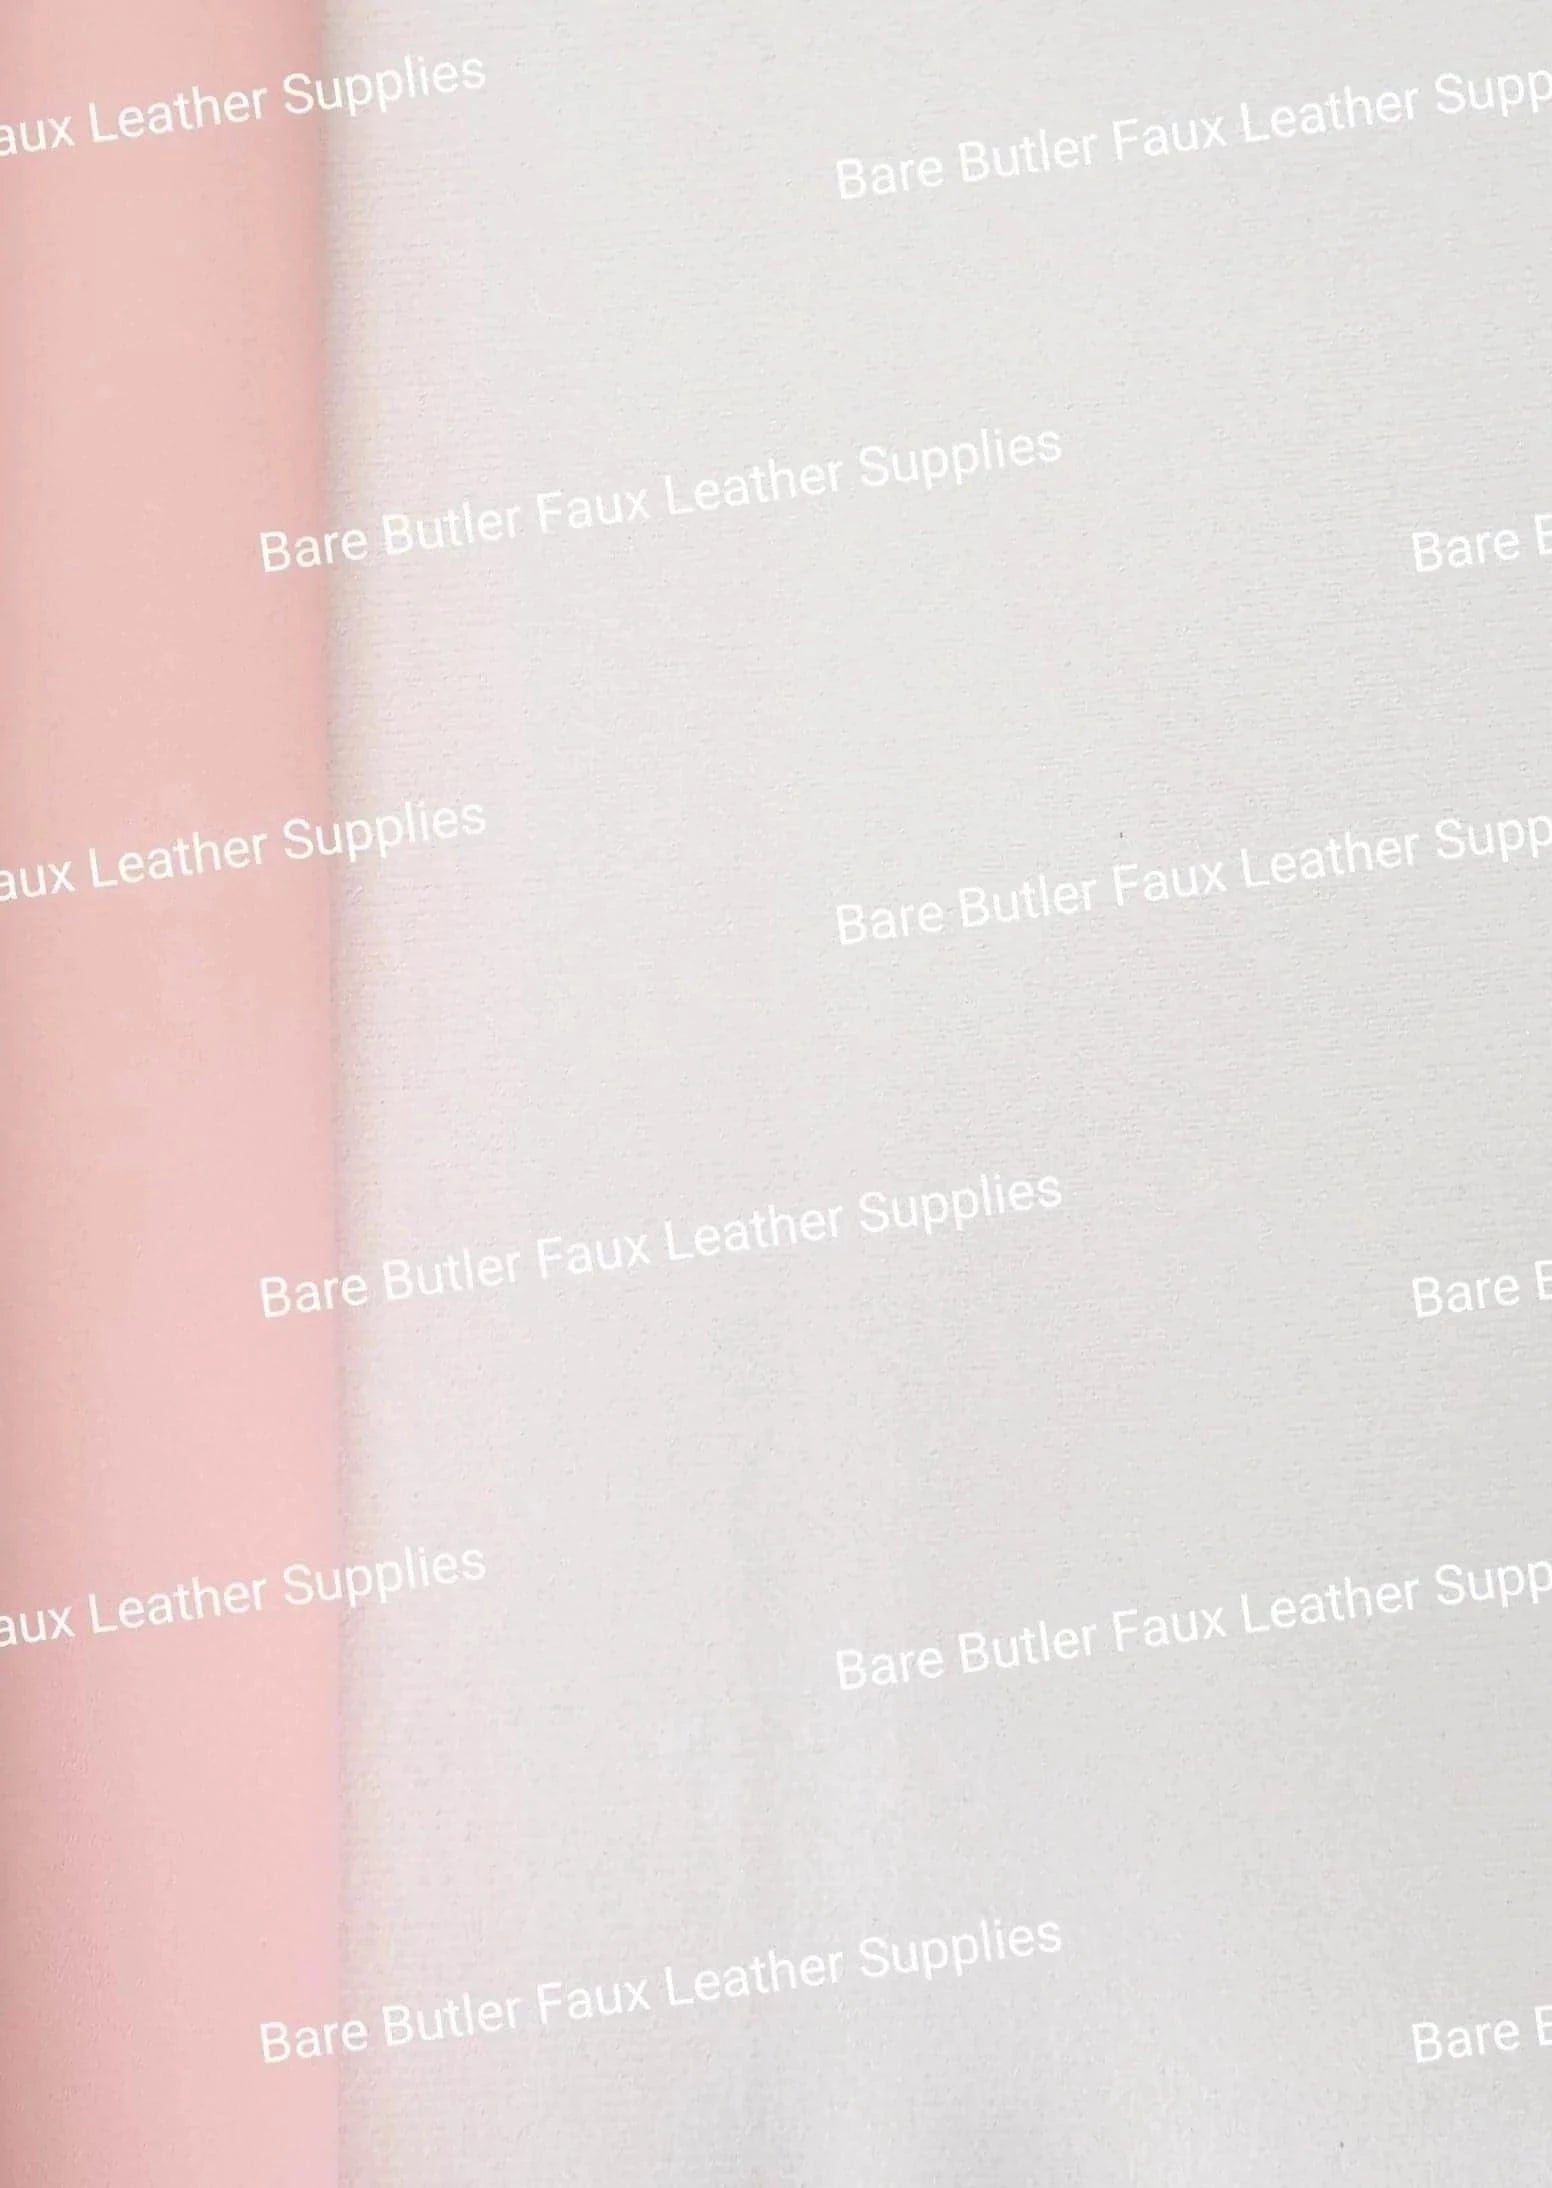 Roll - Pastels Baby Pink - butter, Faux, Faux Leather, pastel, pastels, Roll, soft - Bare Butler Faux Leather Supplies 